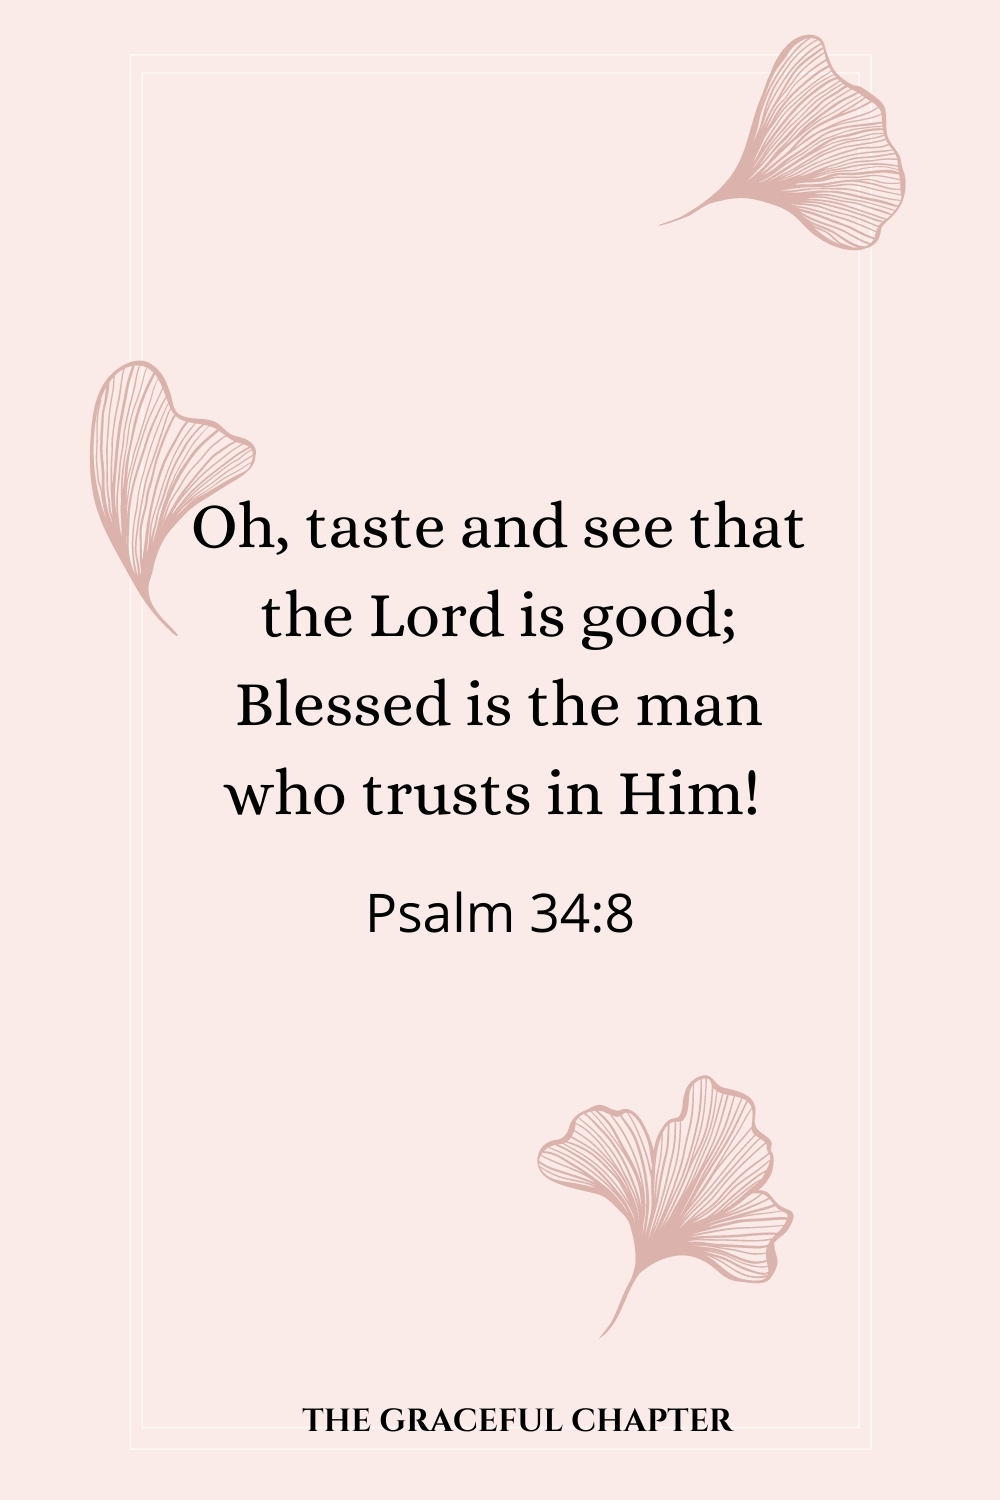 Oh, taste and see that the Lord is good; Blessed is the man who trusts in Him! Oh, taste and see that the Lord is good; Blessed is the man who trusts in Him!  Psalm 34:8